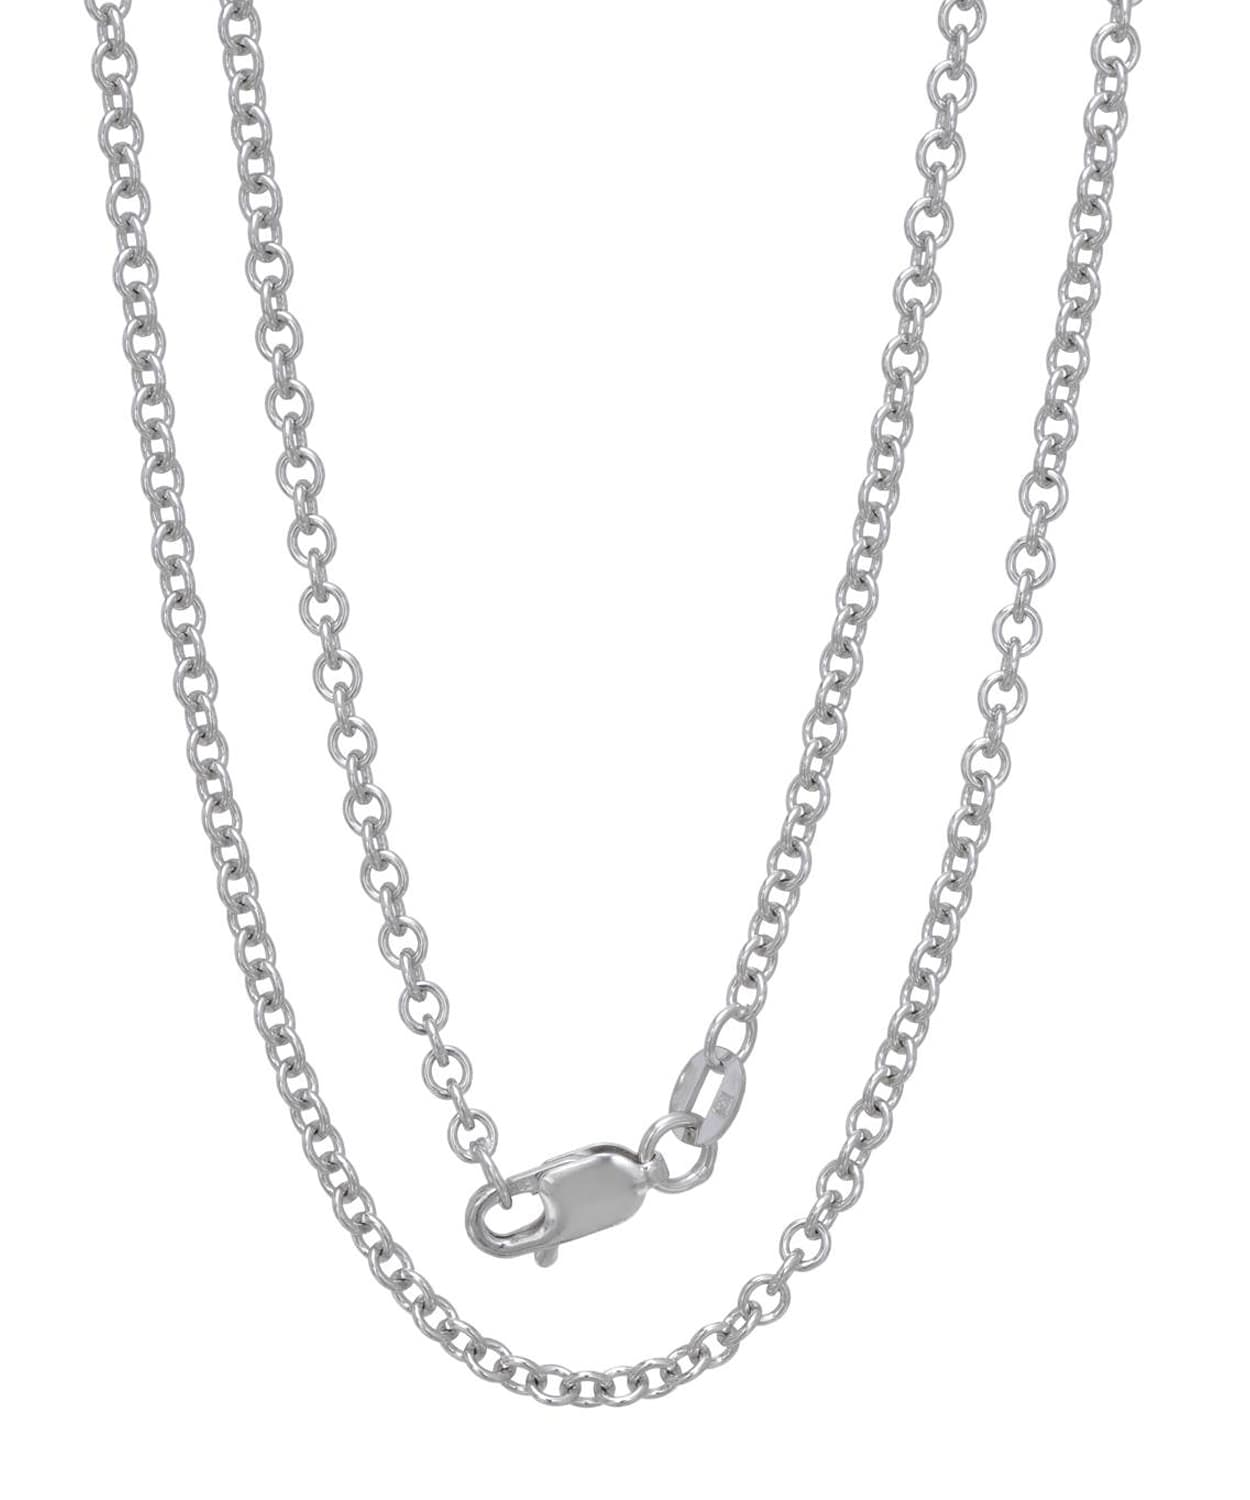 ESEMCO 2.5mm 14k Solid White Gold Rolo Chain View 2